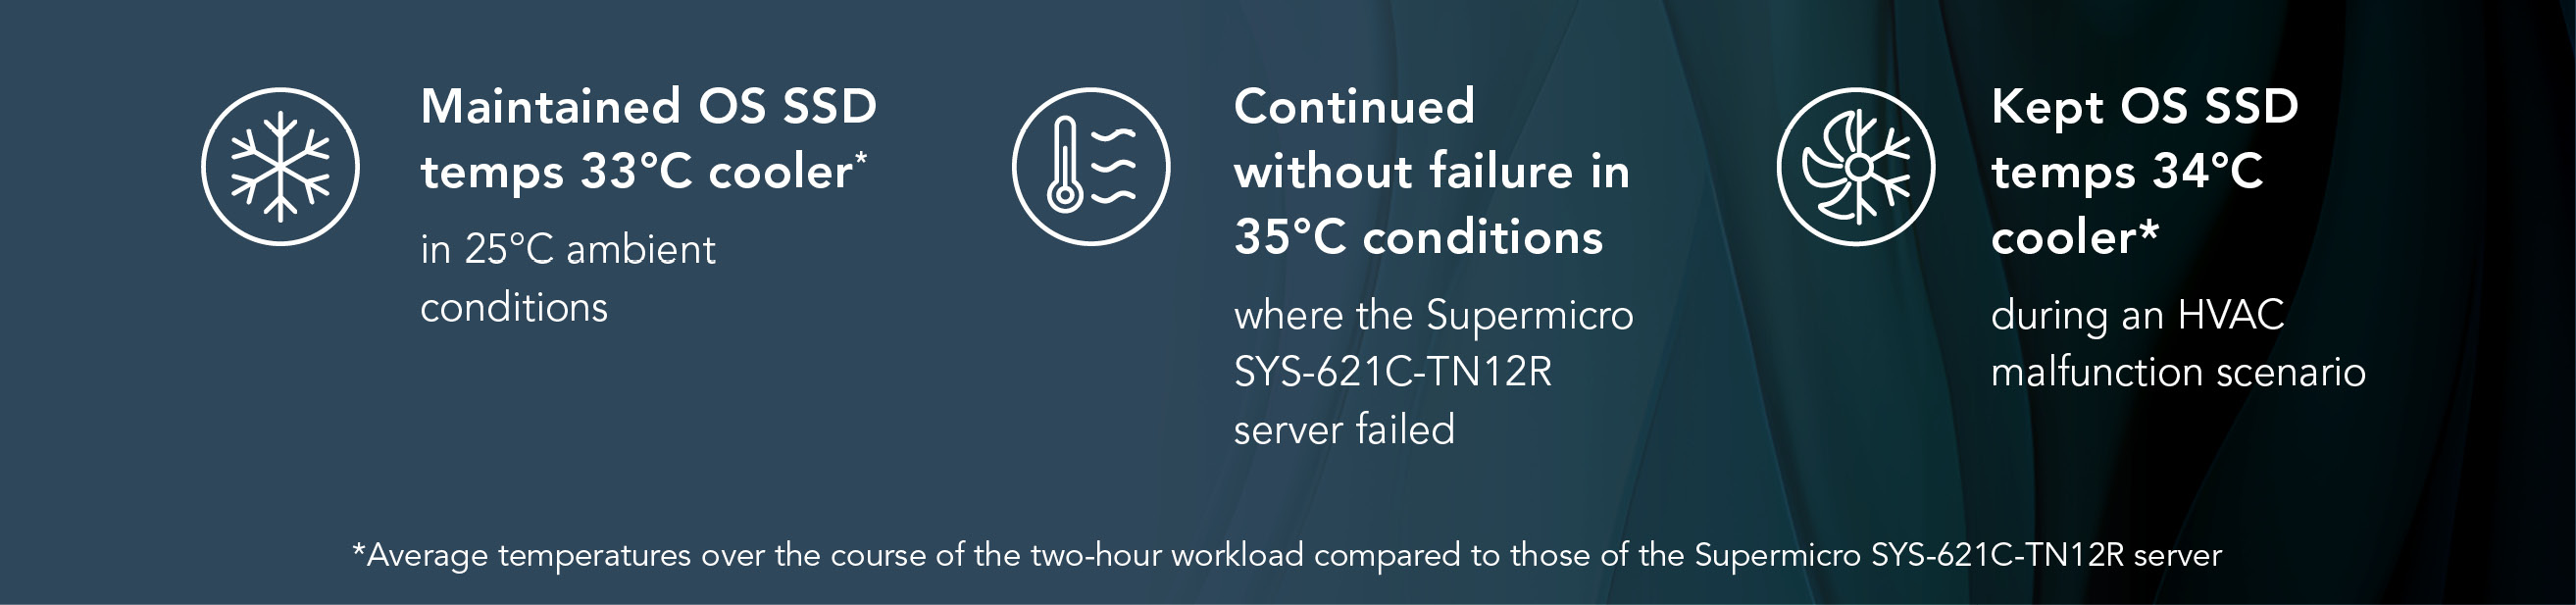 The Dell PowerEdge HS5620 maintained OS SSD temperatures 33°C cooler in 25°C ambient conditions (when comparing average temperatures over the course of the two-hour workload to those of the Supermicro SYS‑621C-TN12R server). It also continued without failure in 35°C conditions where the Supermicro SYS‑621C-TN12R server failed, and it kept OS SSD temperatures 34°C cooler during an HVAC malfunction scenario (when comparing average temperatures over the course of the two-hour workload to those of the Supermicro SYS‑621C-TN12R server).